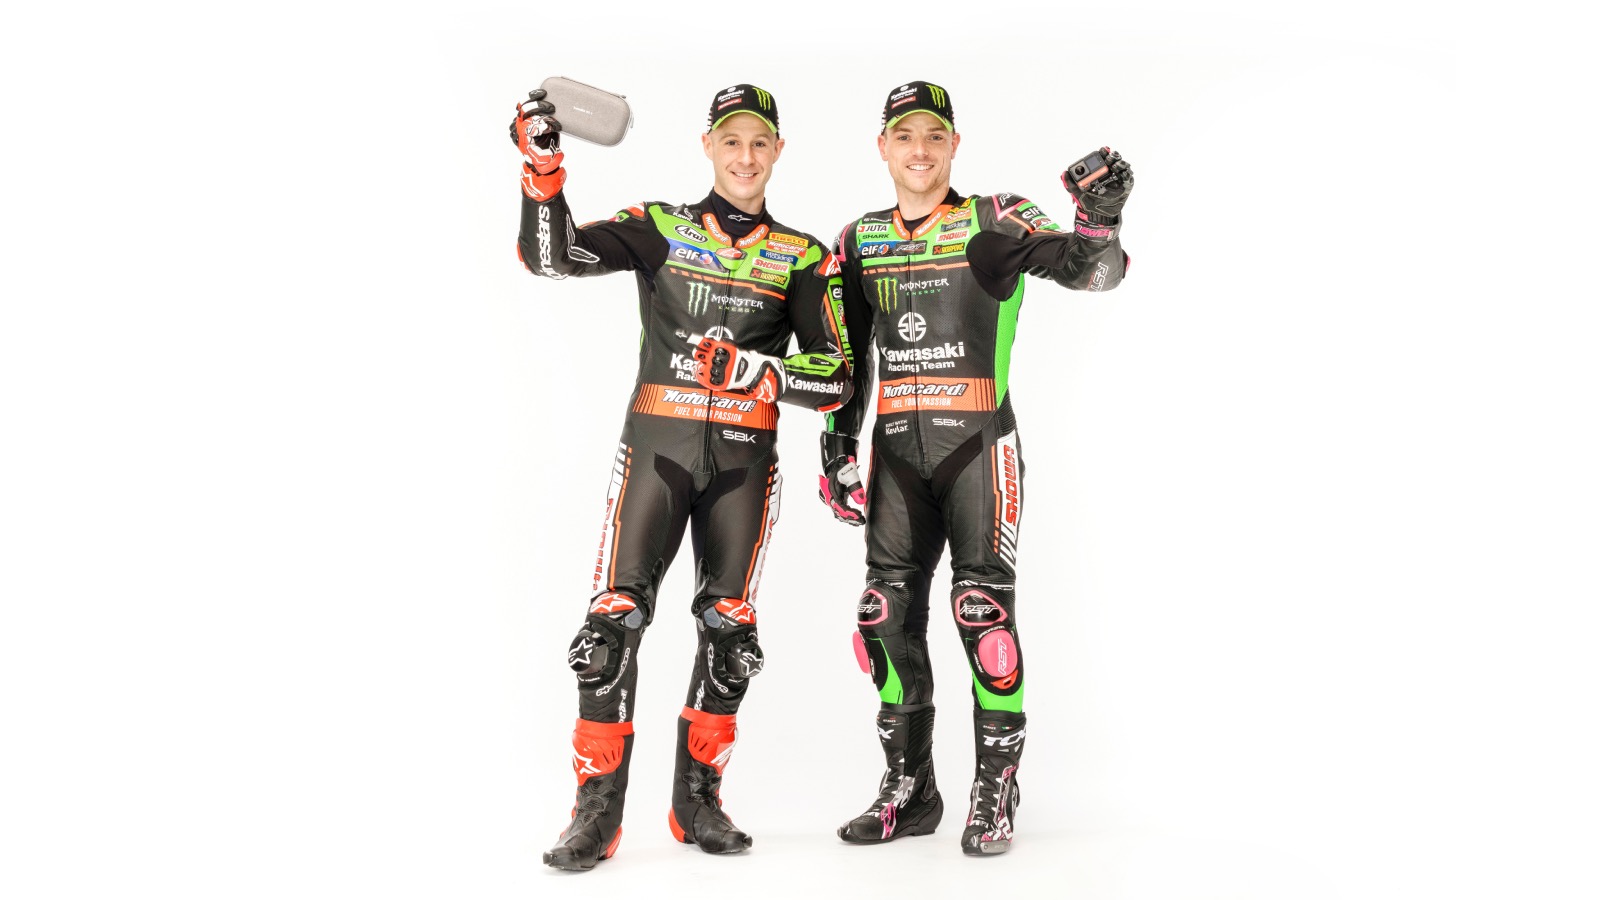 A view of the Insta360 camera offerings for 2022 WorldSBK's KRT, with Jonathan Rea and Alex Lowes filling the roles of brand ambassador.